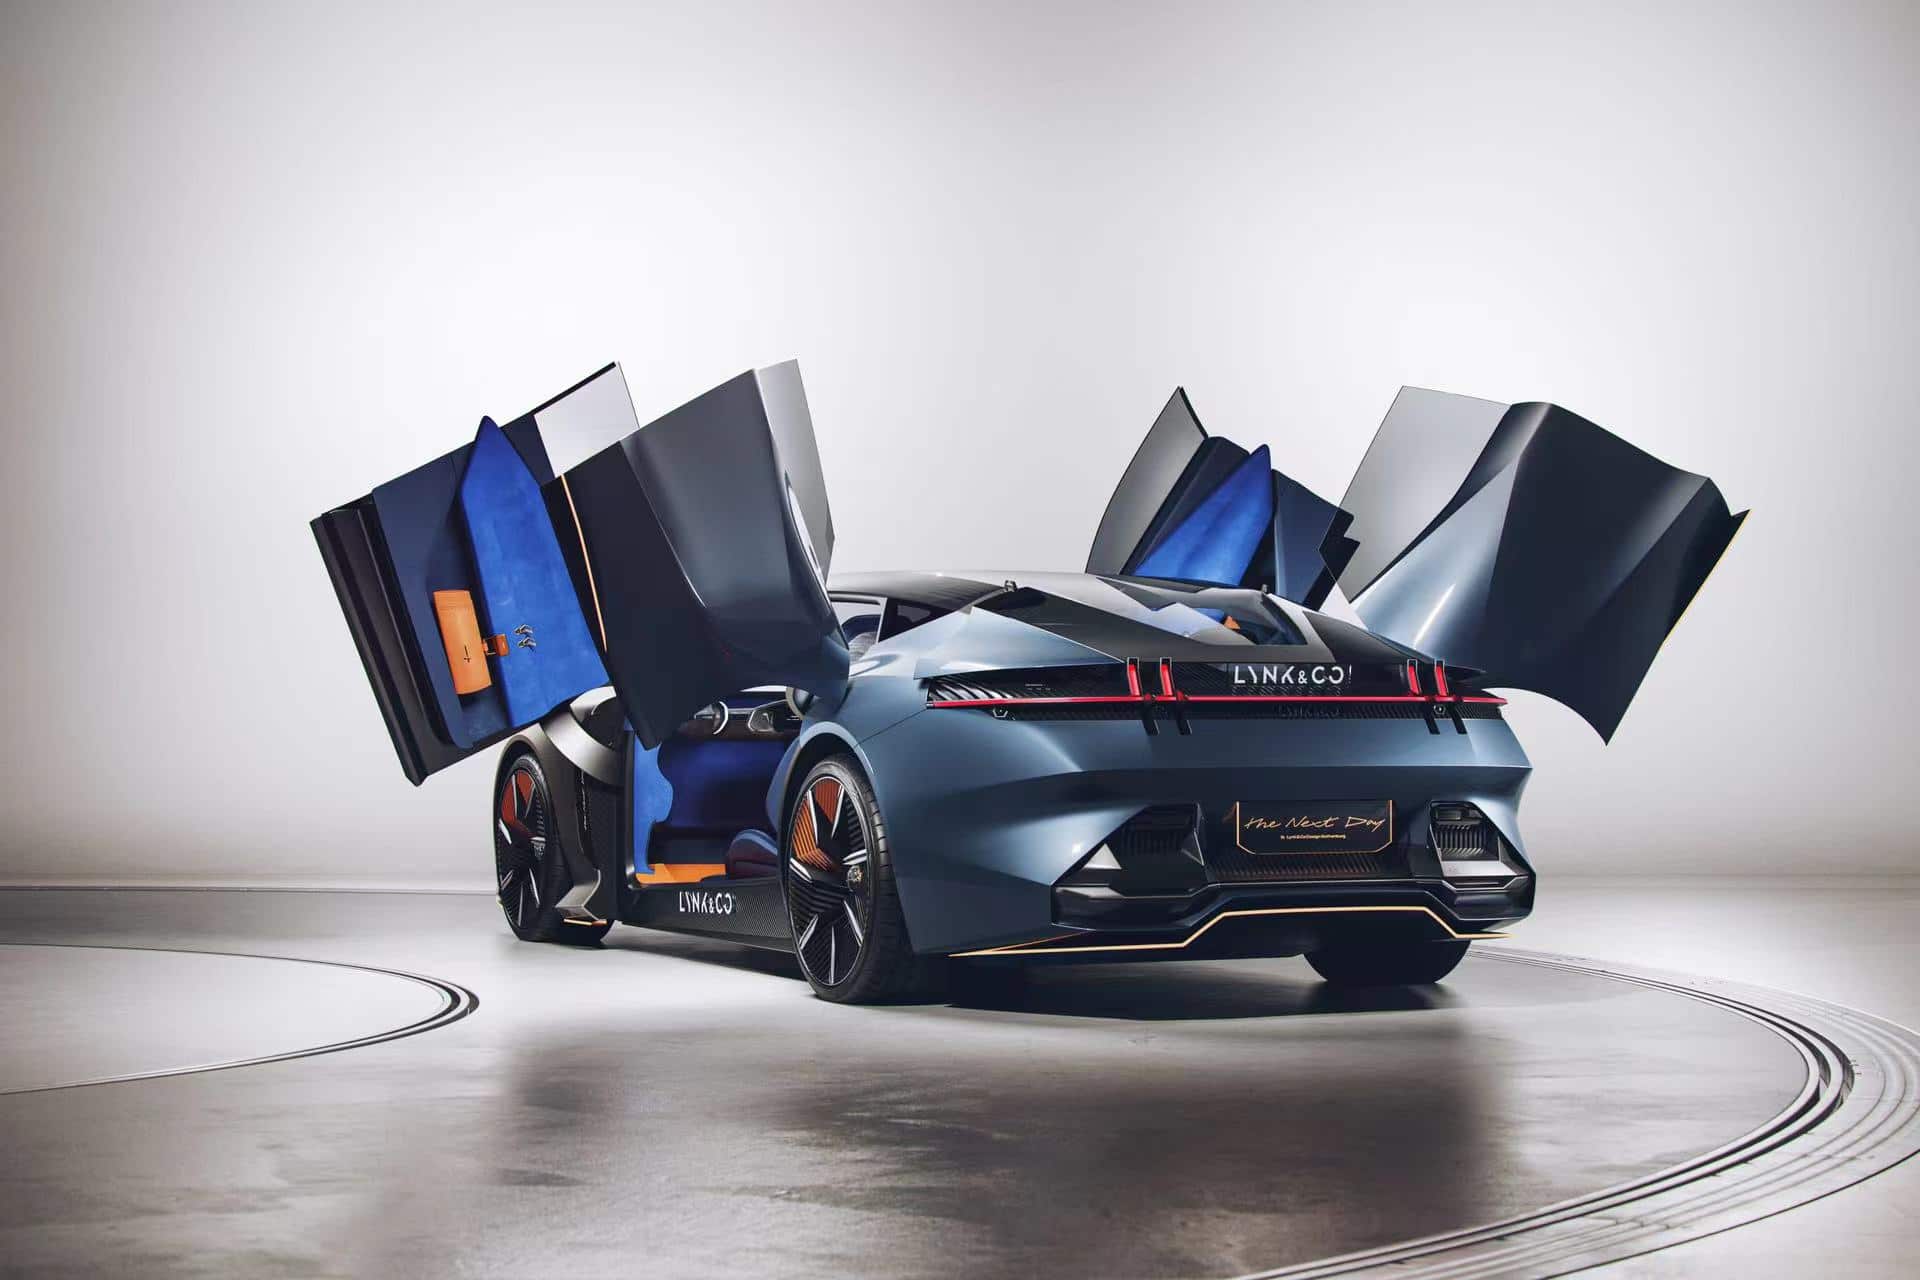 Lynk & Co The Next Day Concept Launched in China Ushering In New Design Era